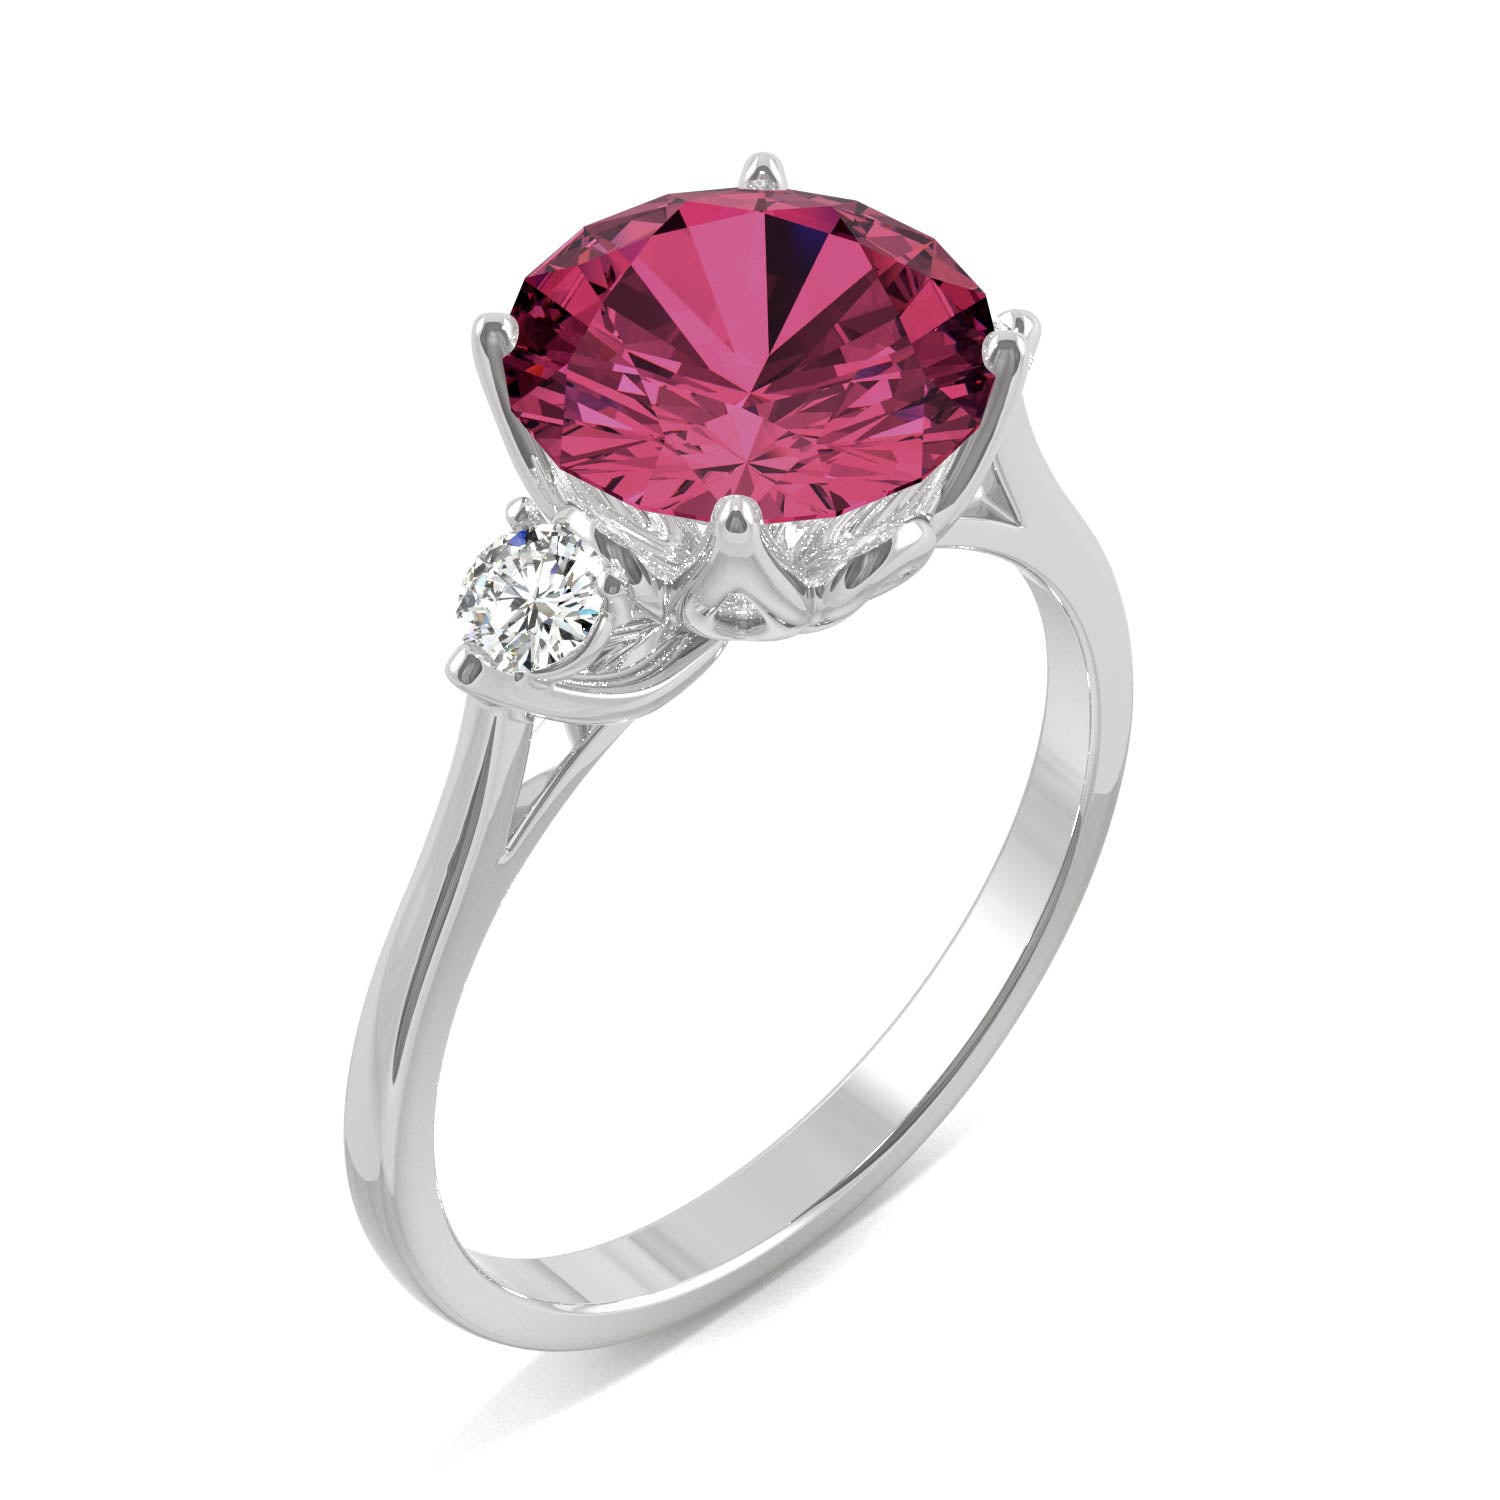 3.55 CTW DEW Round Ruby Engagement Ring in 14K White Gold